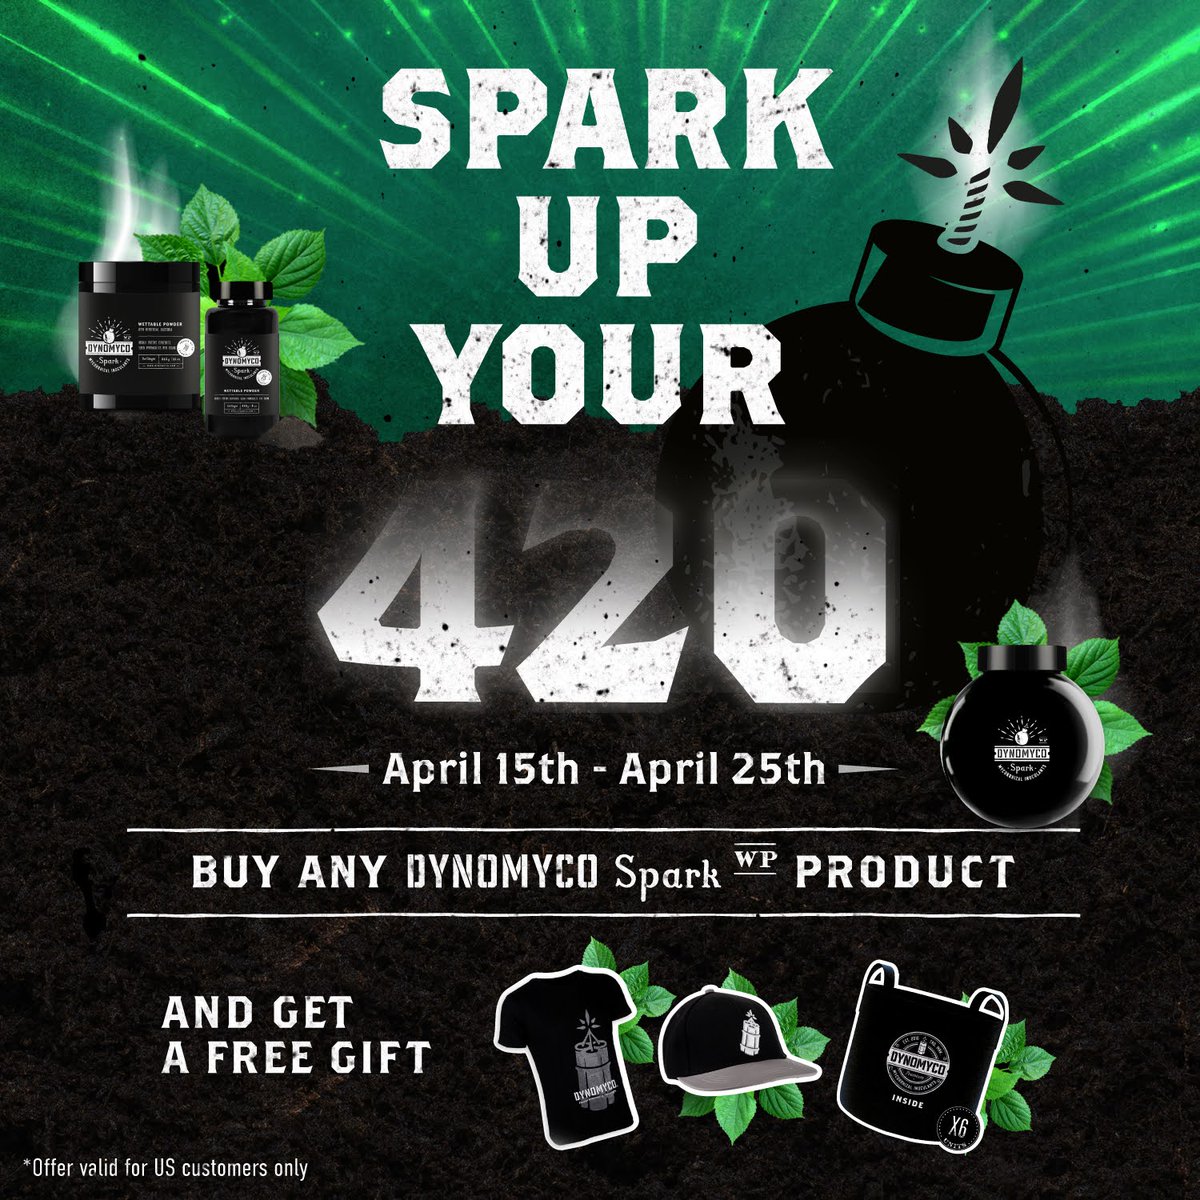 Spark up your 420 celebrations from April 15th to April 25th, 2024! Purchase any DYNOMYCO spark product during this period and receive a complimentary gift. Explore more and elevate your experience at dynomyco.com #DYNOMYCO #420Spark #FreeGift